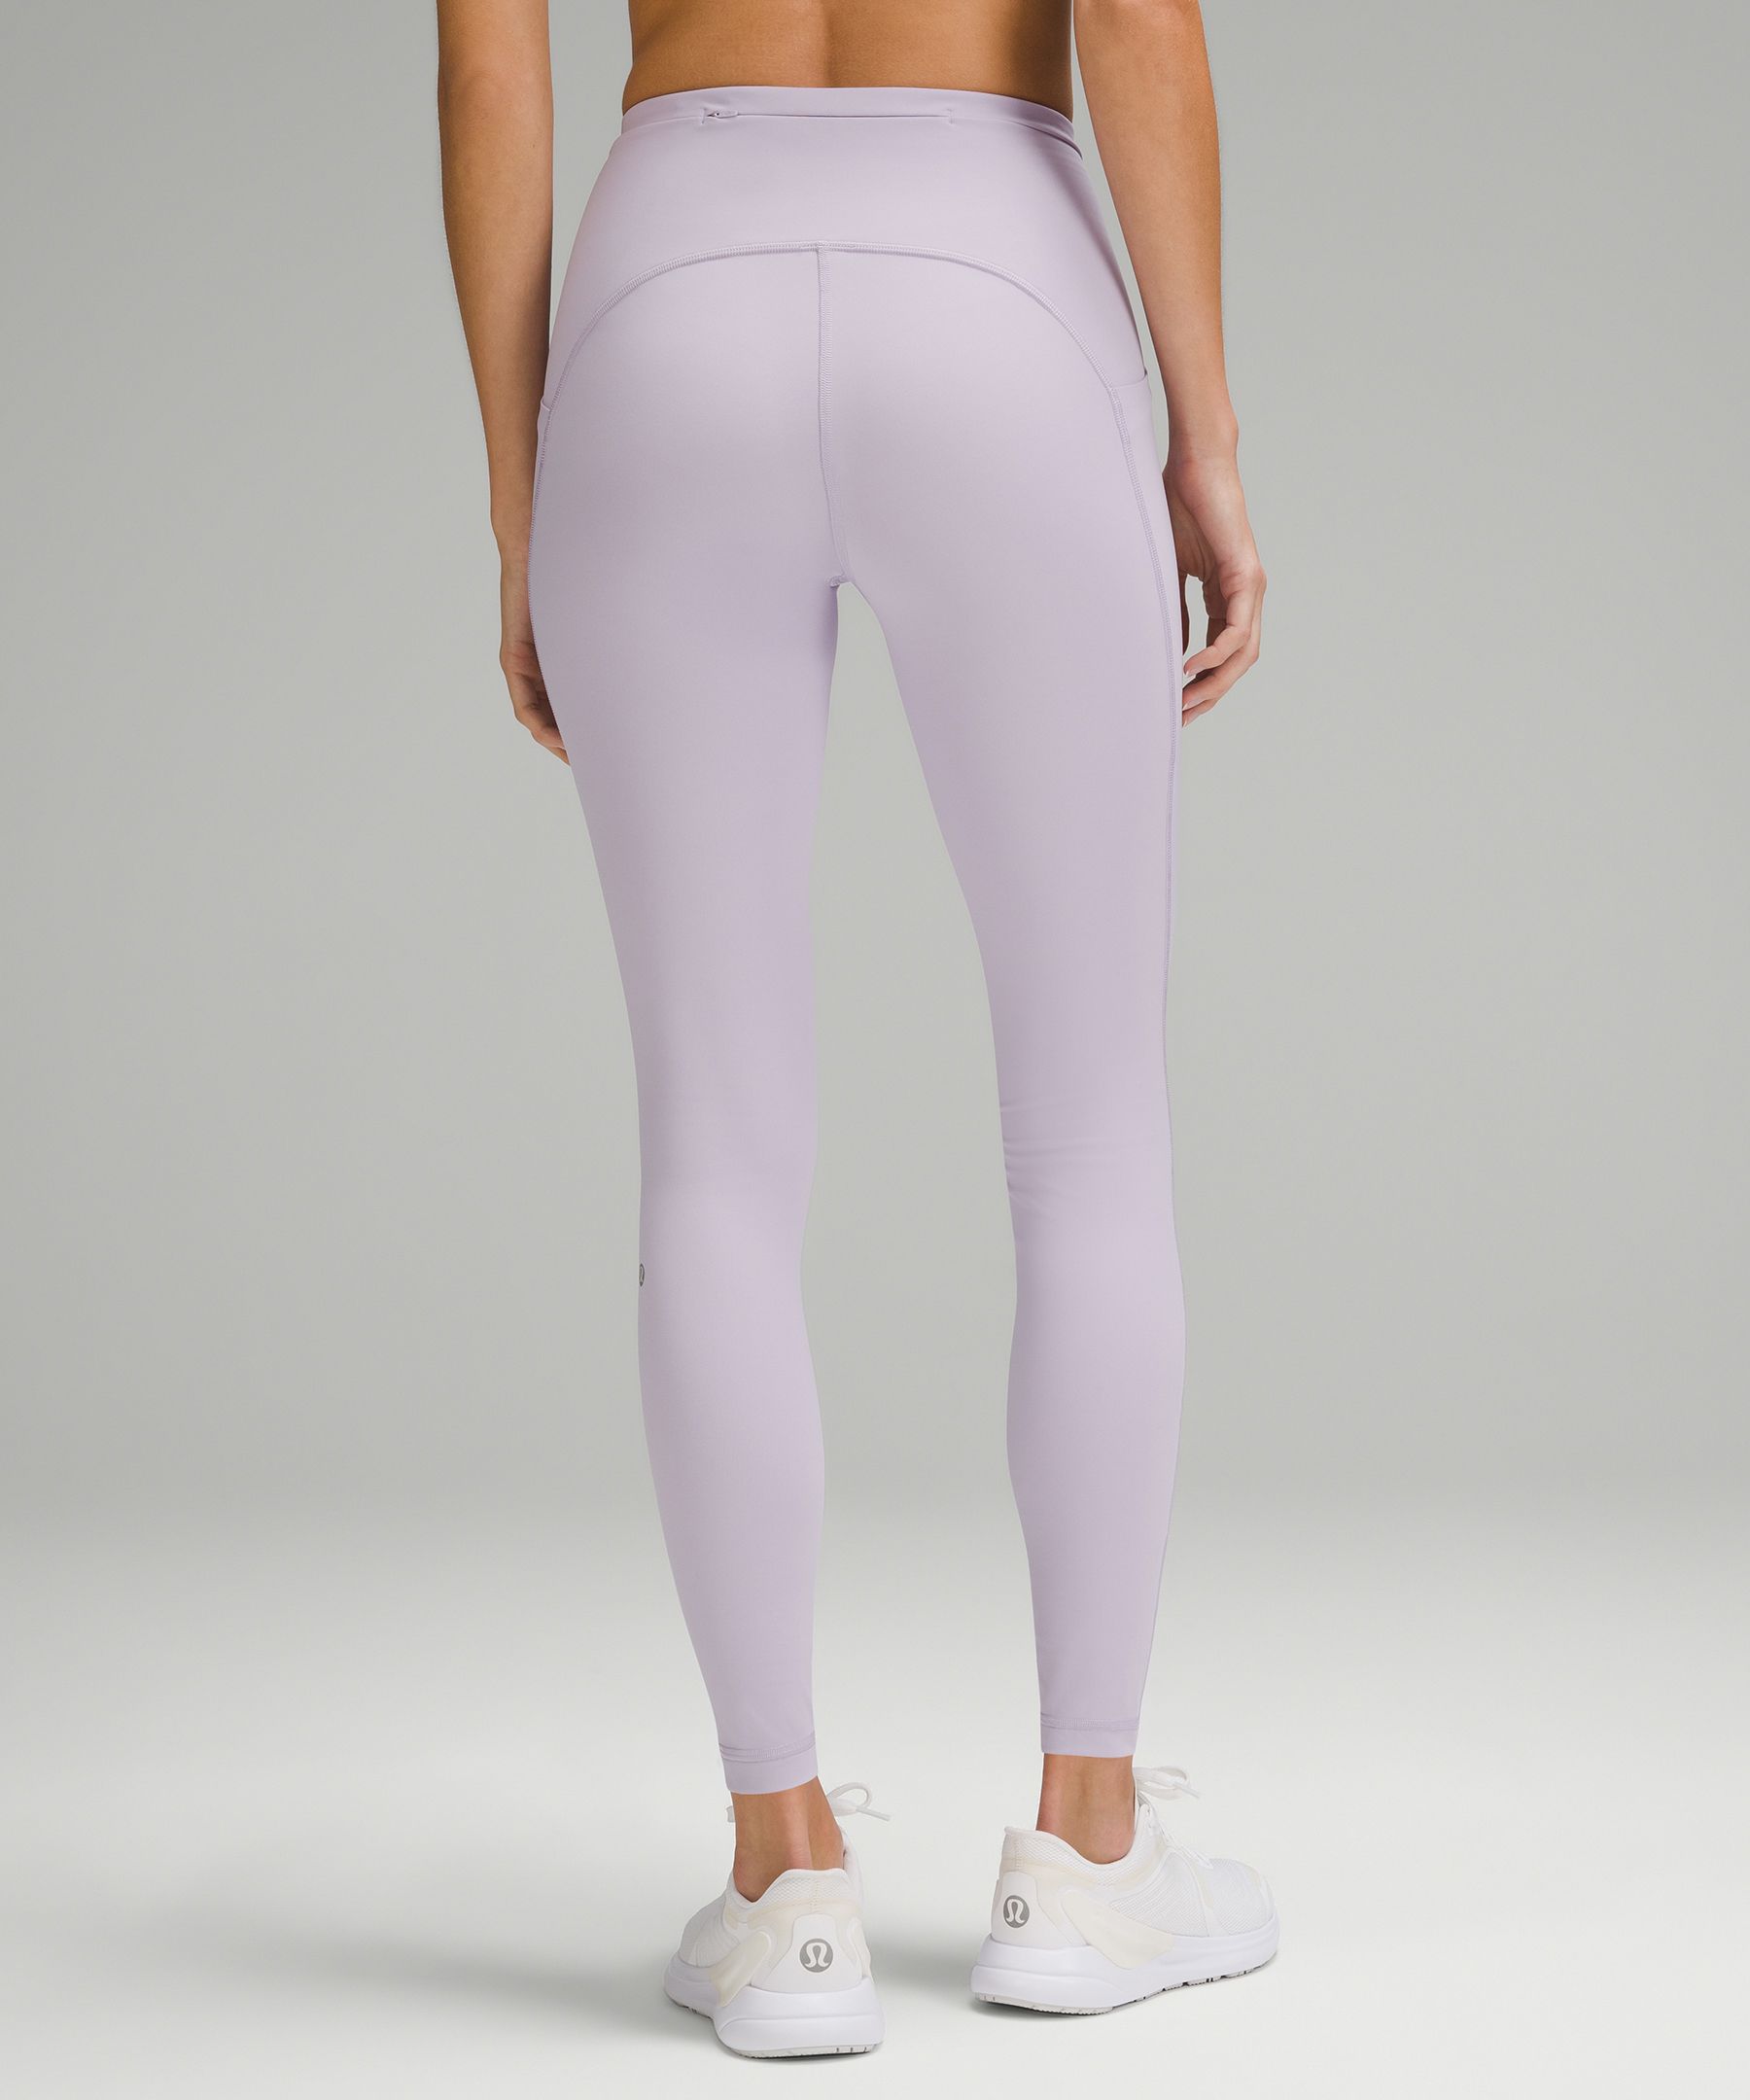 NWT Lululemon Swift Speed HR Tight 28”, Size 4, Vintage Plum Purple Color  for Sale in Hercules, CA - OfferUp